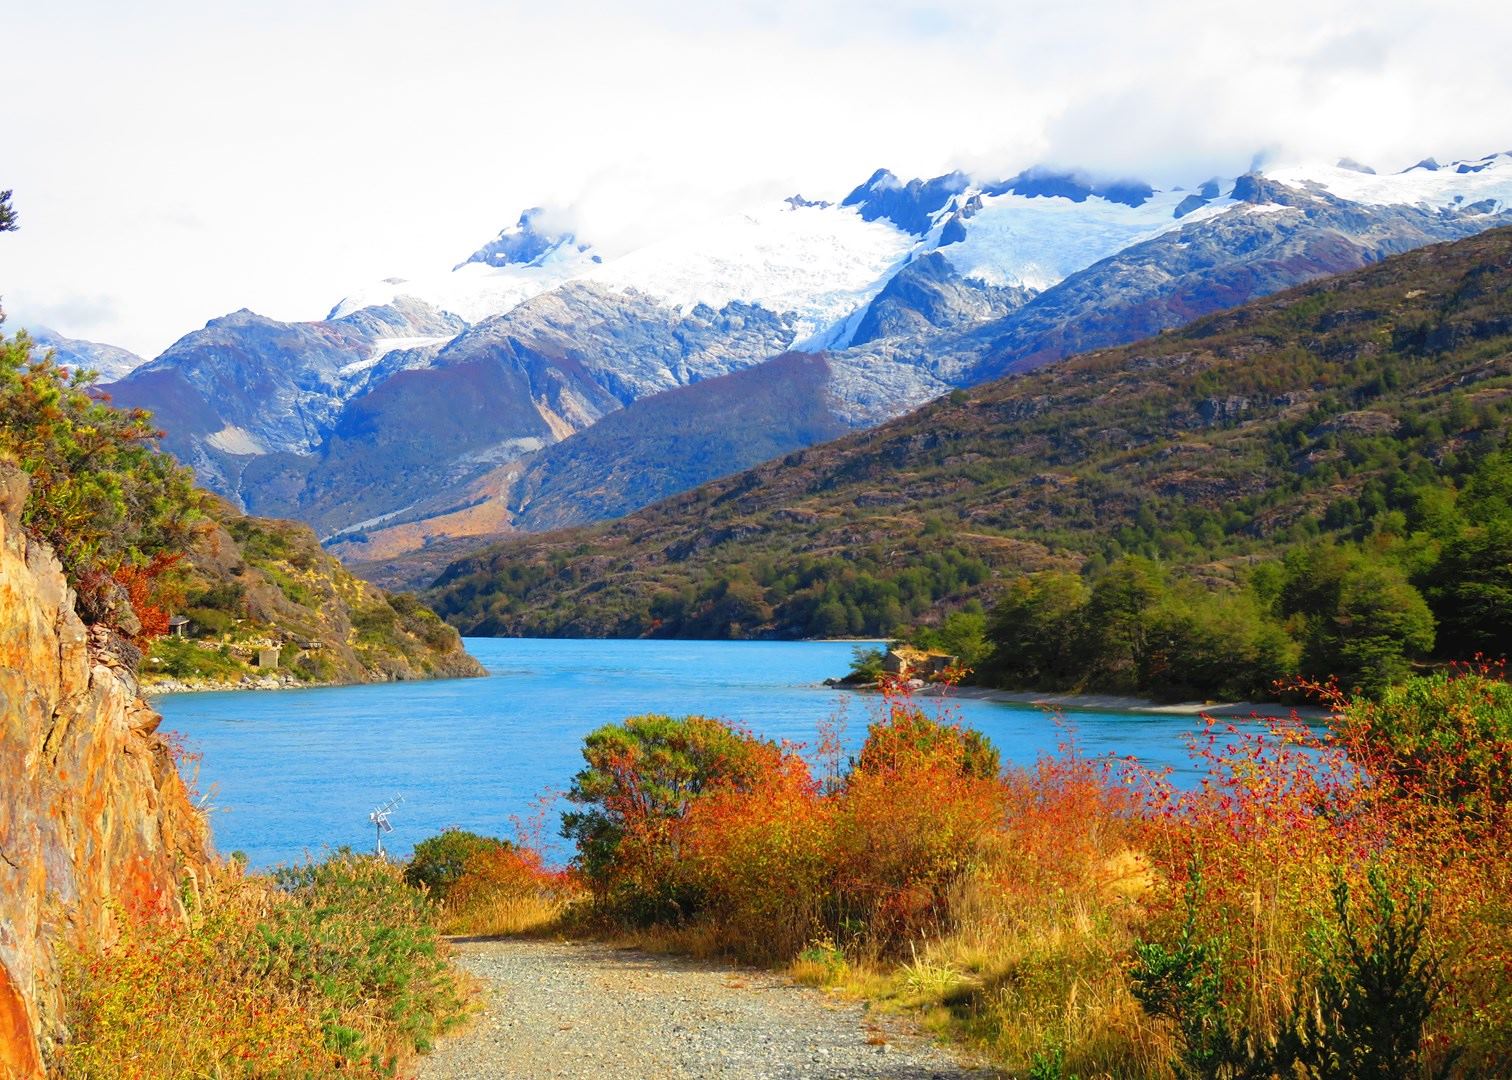 Visit Chacabuco Valley & Parque Patagonia, Chile | Audley Travel